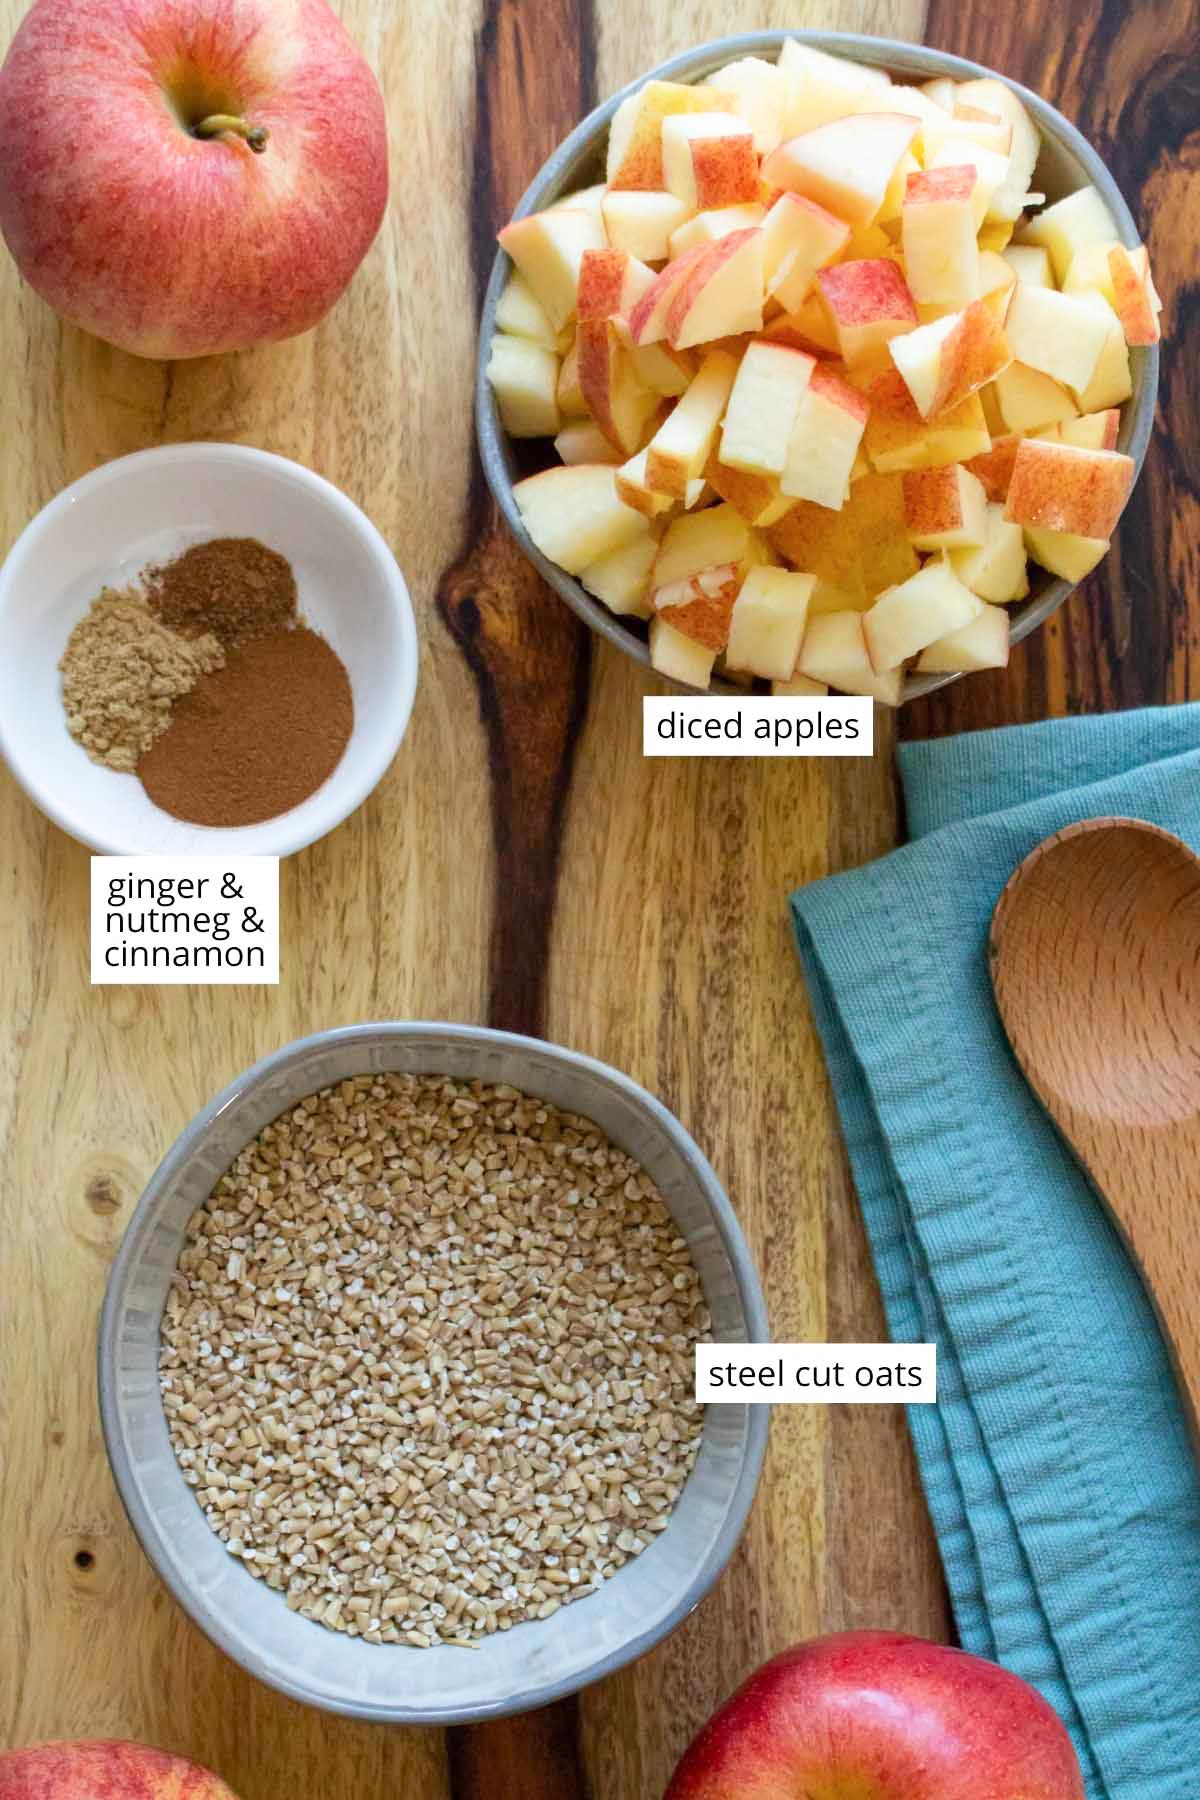 spices, diced apples, and steel cut oats in bowls on a wooden table, each labeled with text